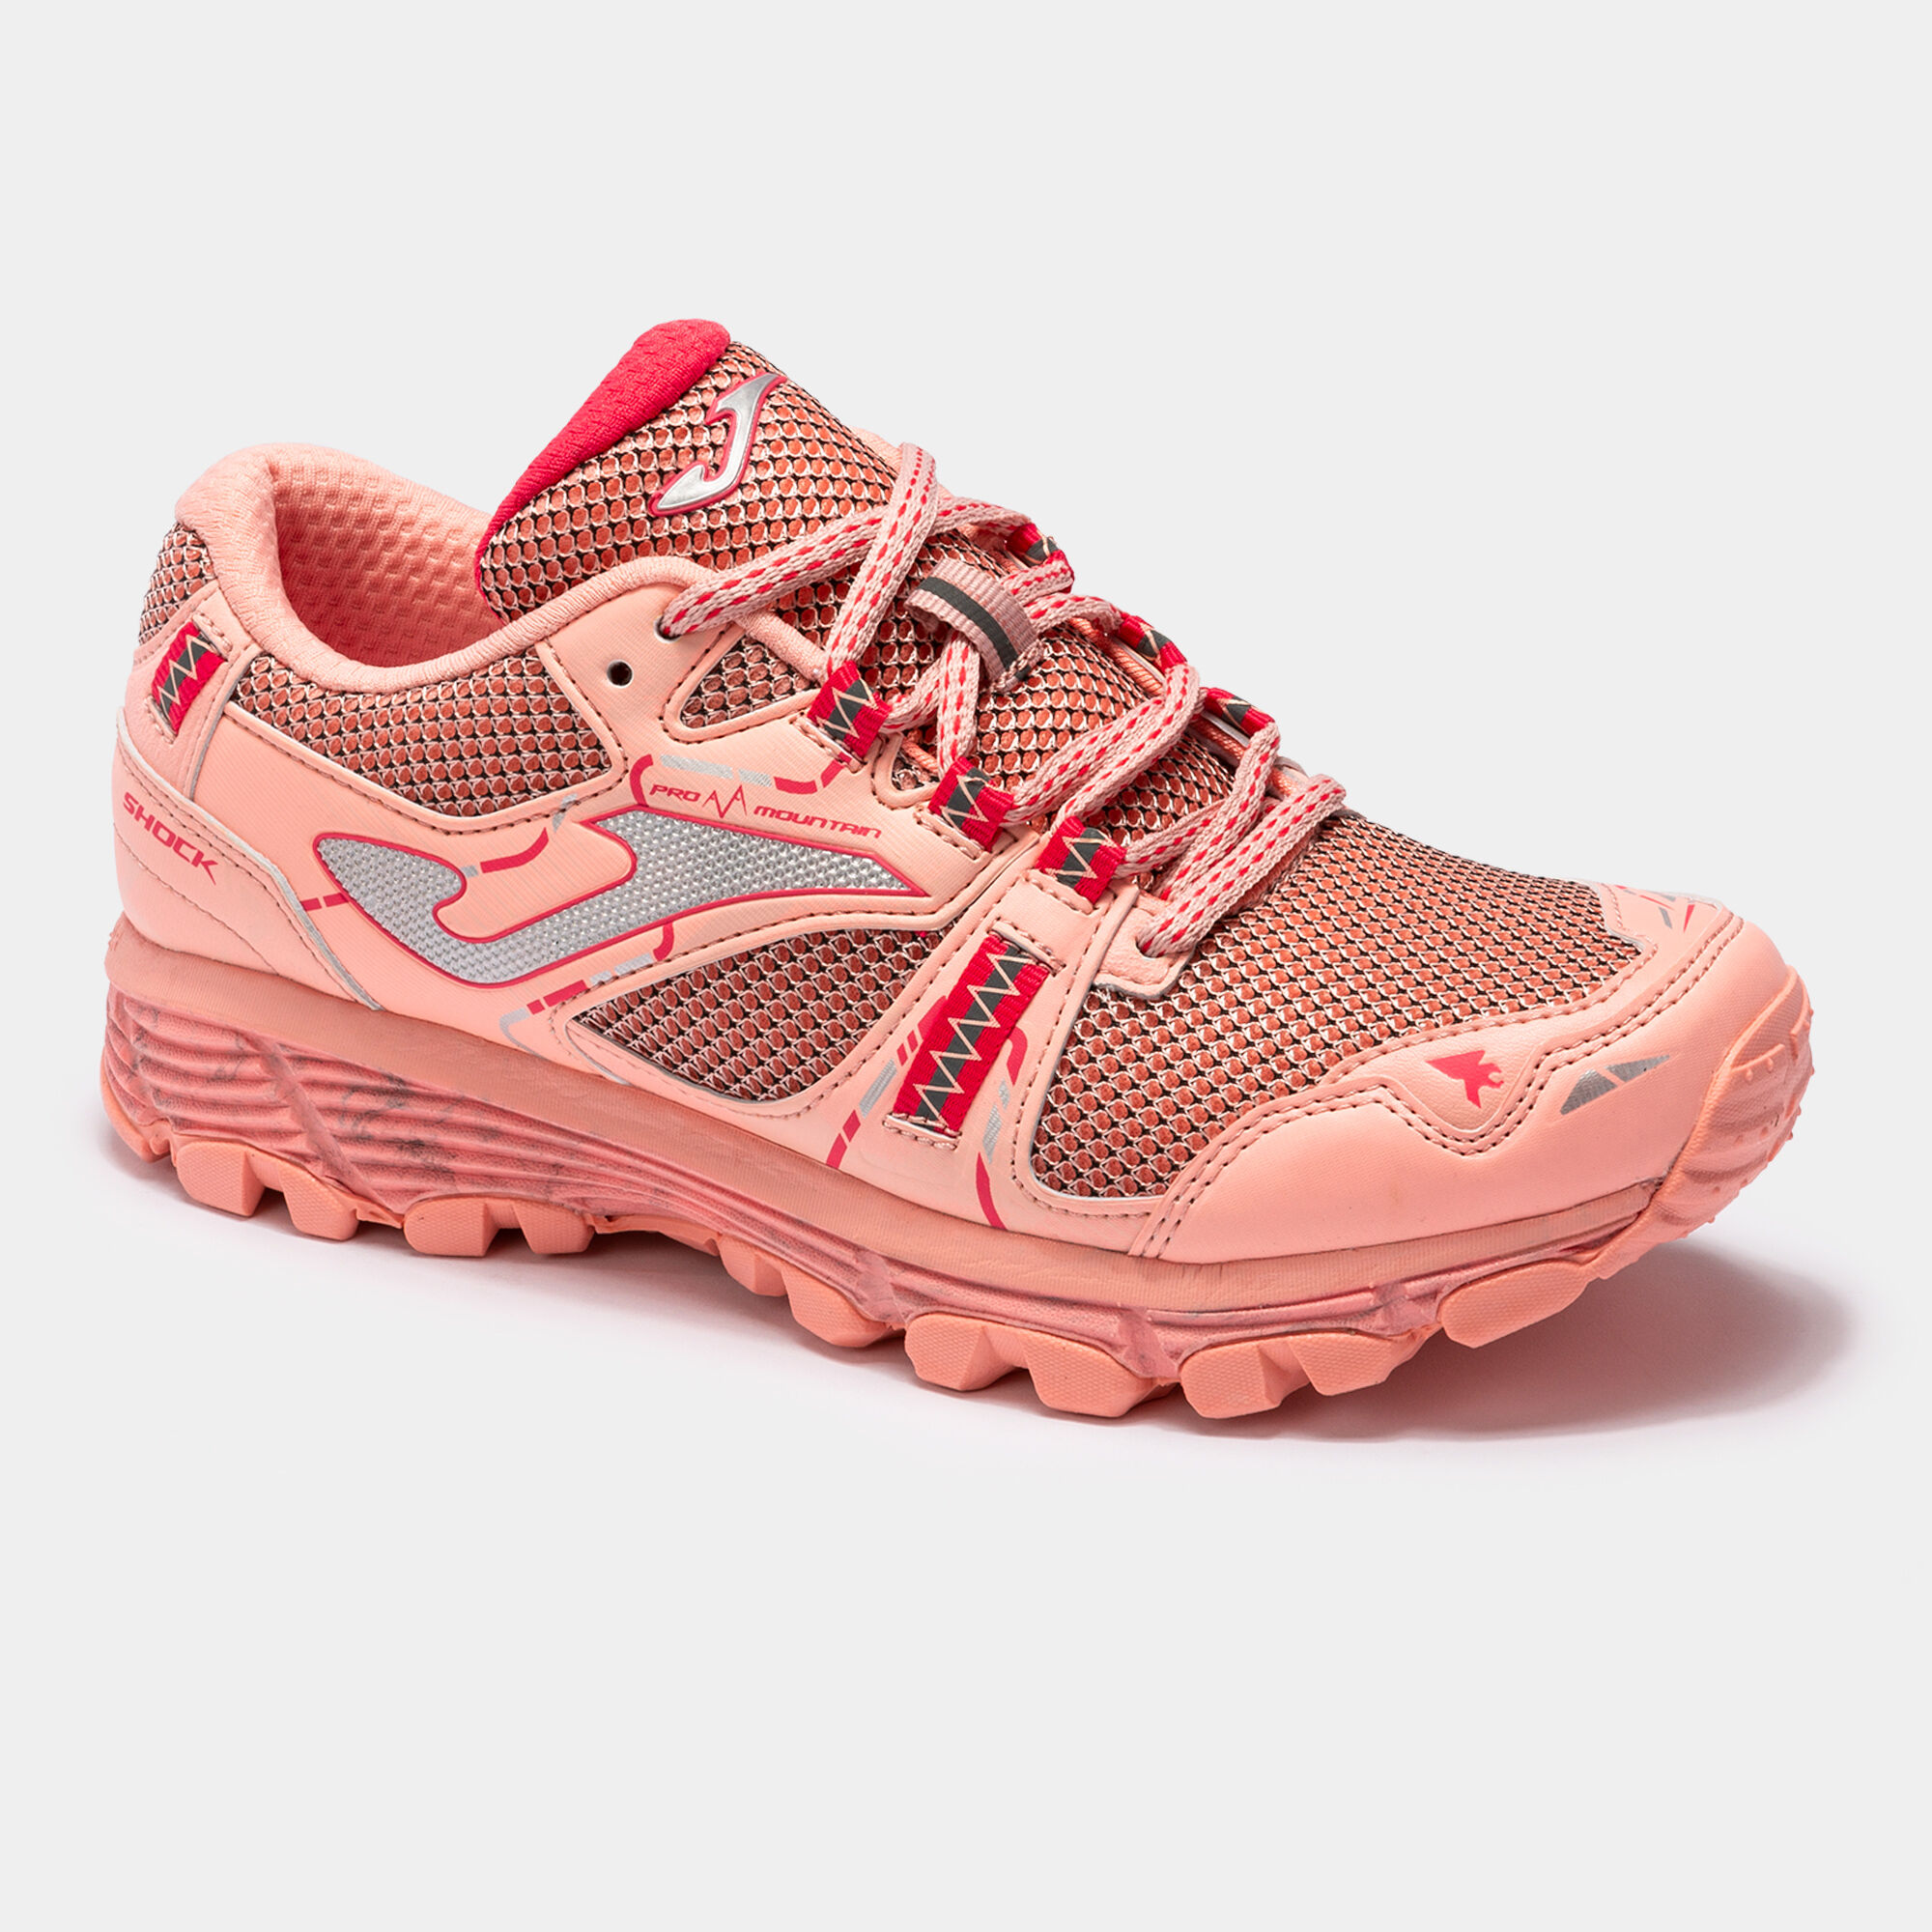 Trail-running shoes Shock 22 woman pink gray JOMA®